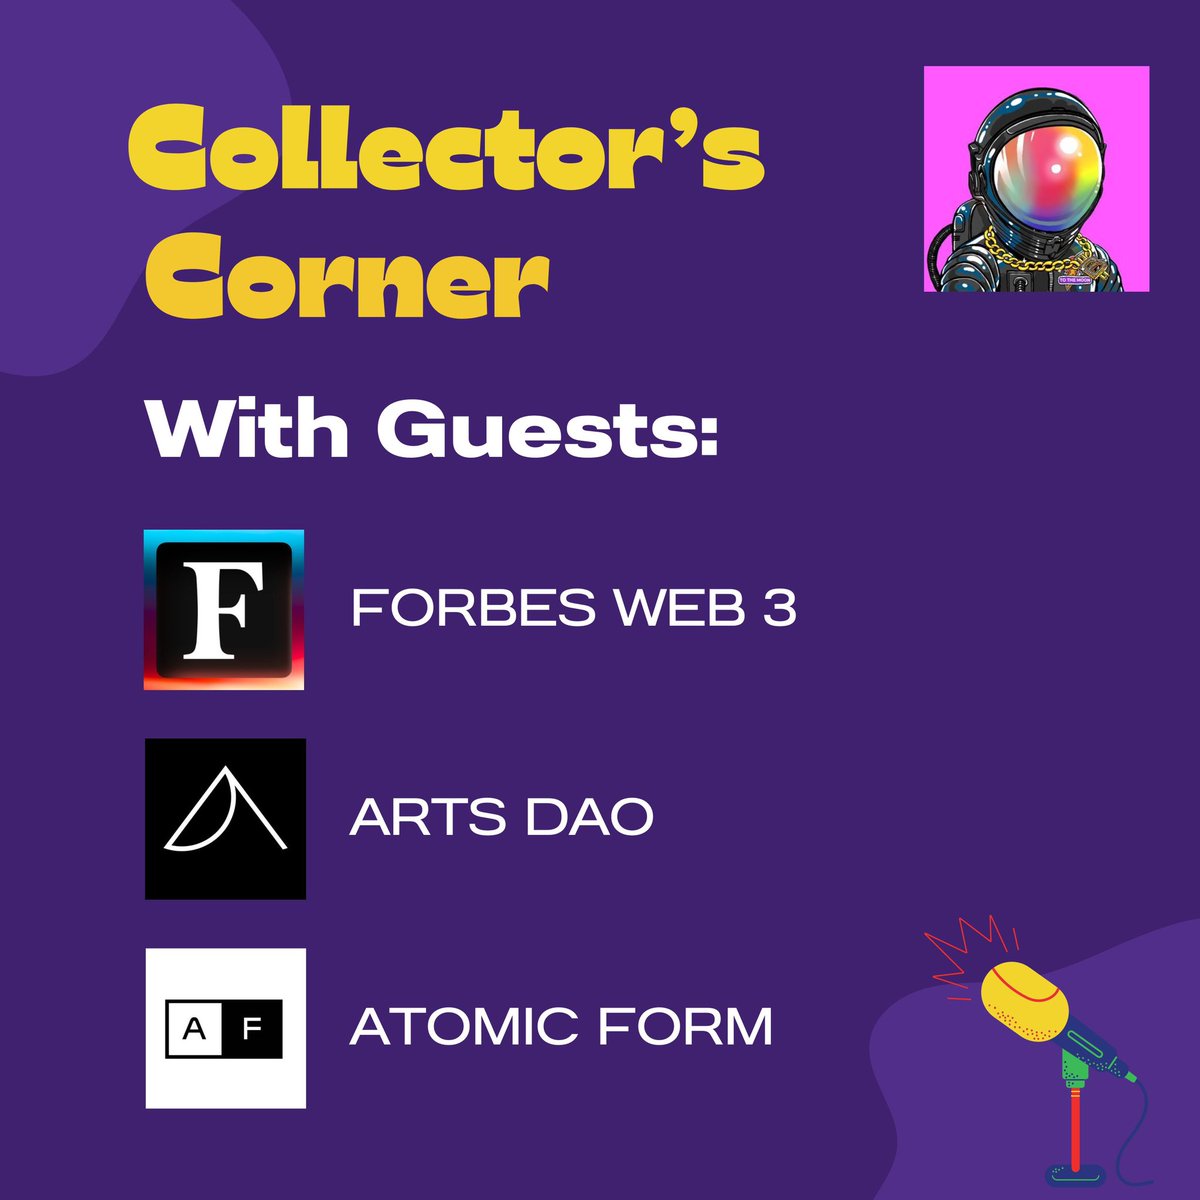 Join us tomorrow in Collector’s Corner for an incredible line up of guests: @ForbesWeb3 @0xManiPatel @arts_dao & @atomicform Your Hosts: @Jeni_Pepen @studiopaiman @xoj9 @KarrieRoss @SBJ_NFT @wallplugnft Collector’s Corner was created by the visionary @sheasmith1 and is a hub…